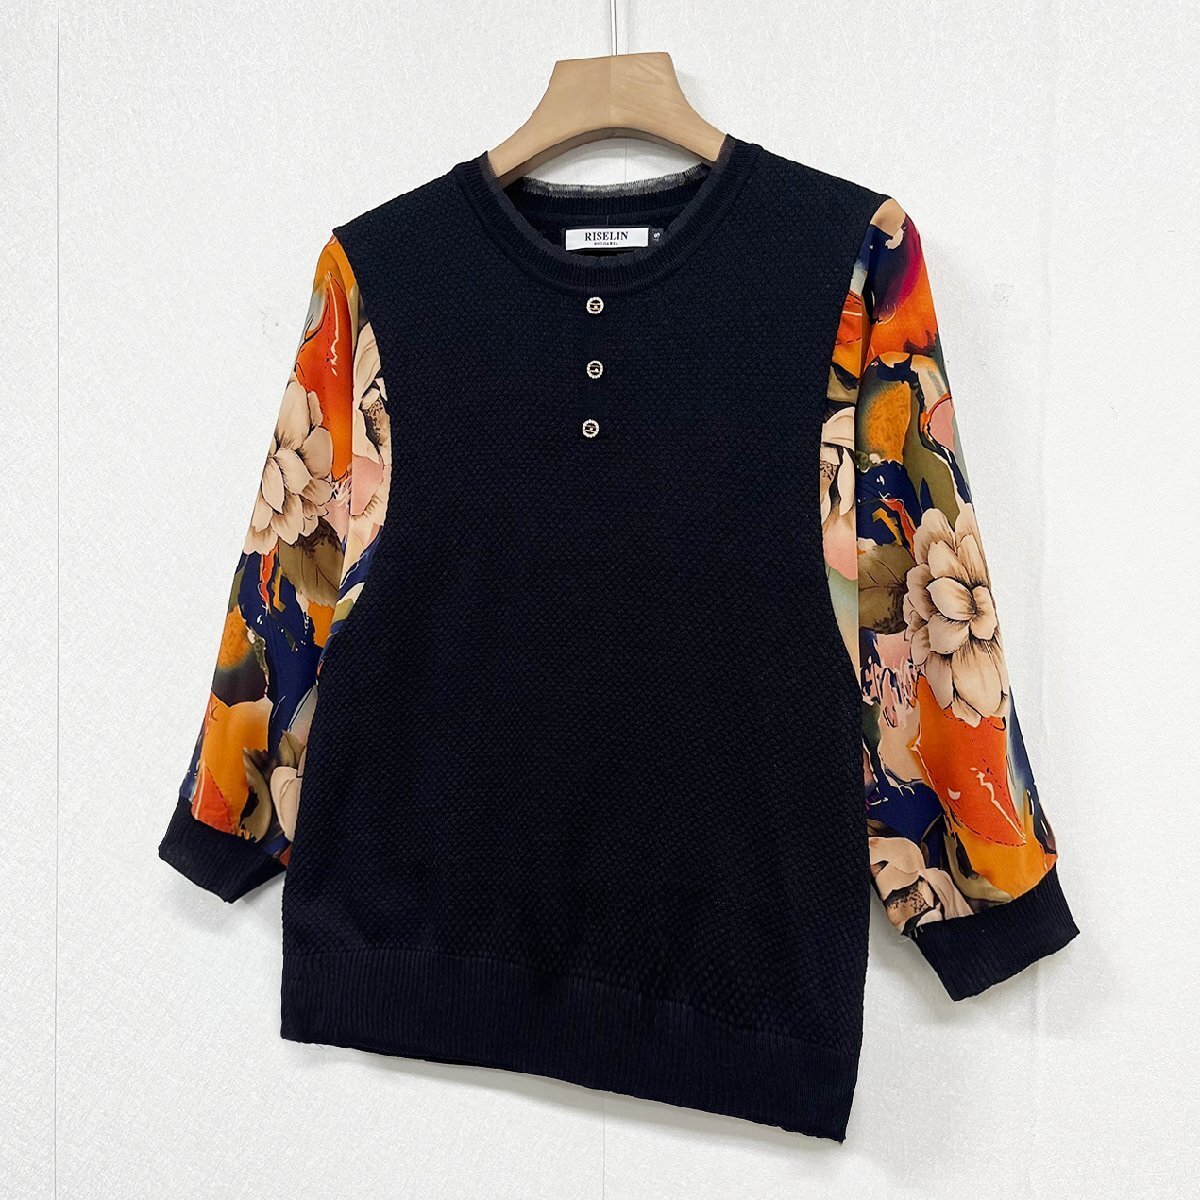  new work Europe made * regular price 4 ten thousand * BVLGARY a departure *RISELIN sweatshirt ventilation easy race switch floral print tops knitted lady's spring summer XL